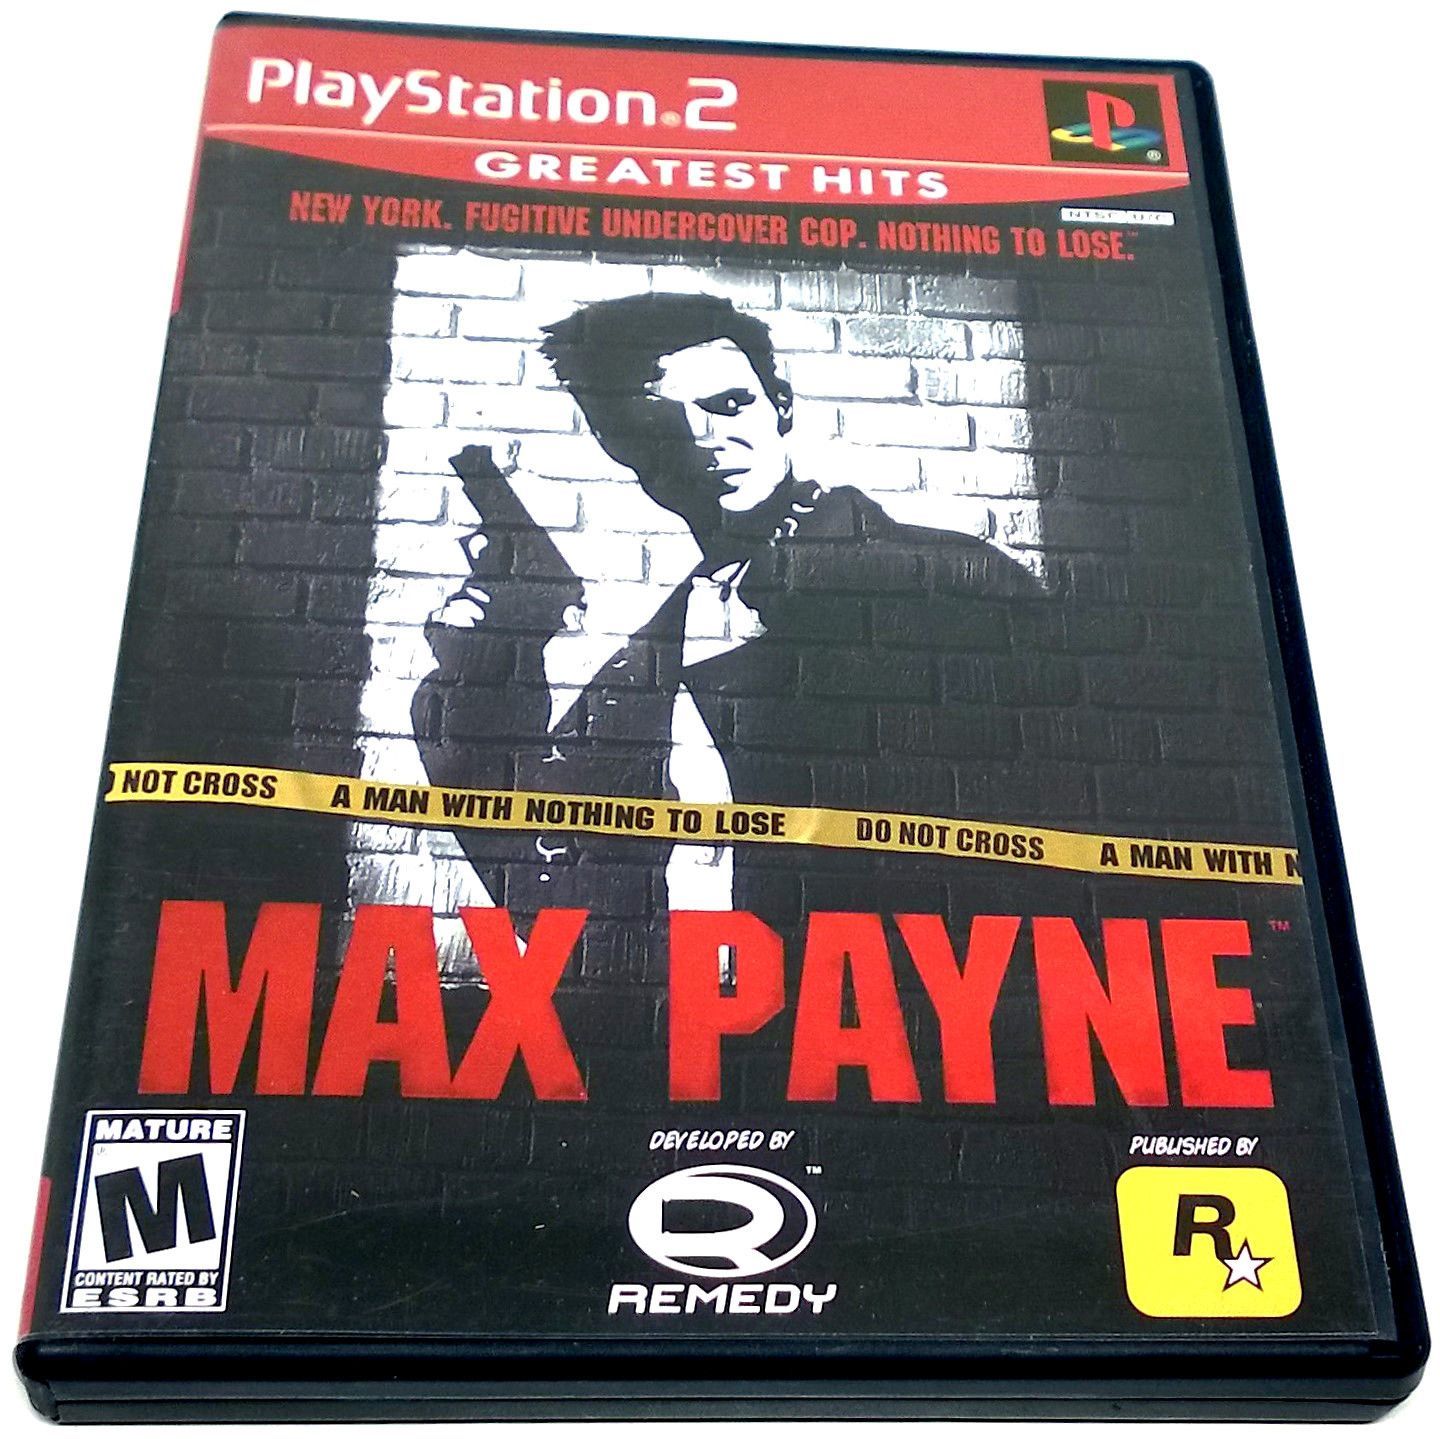 Max Payne for PlayStation 2 - Front of case